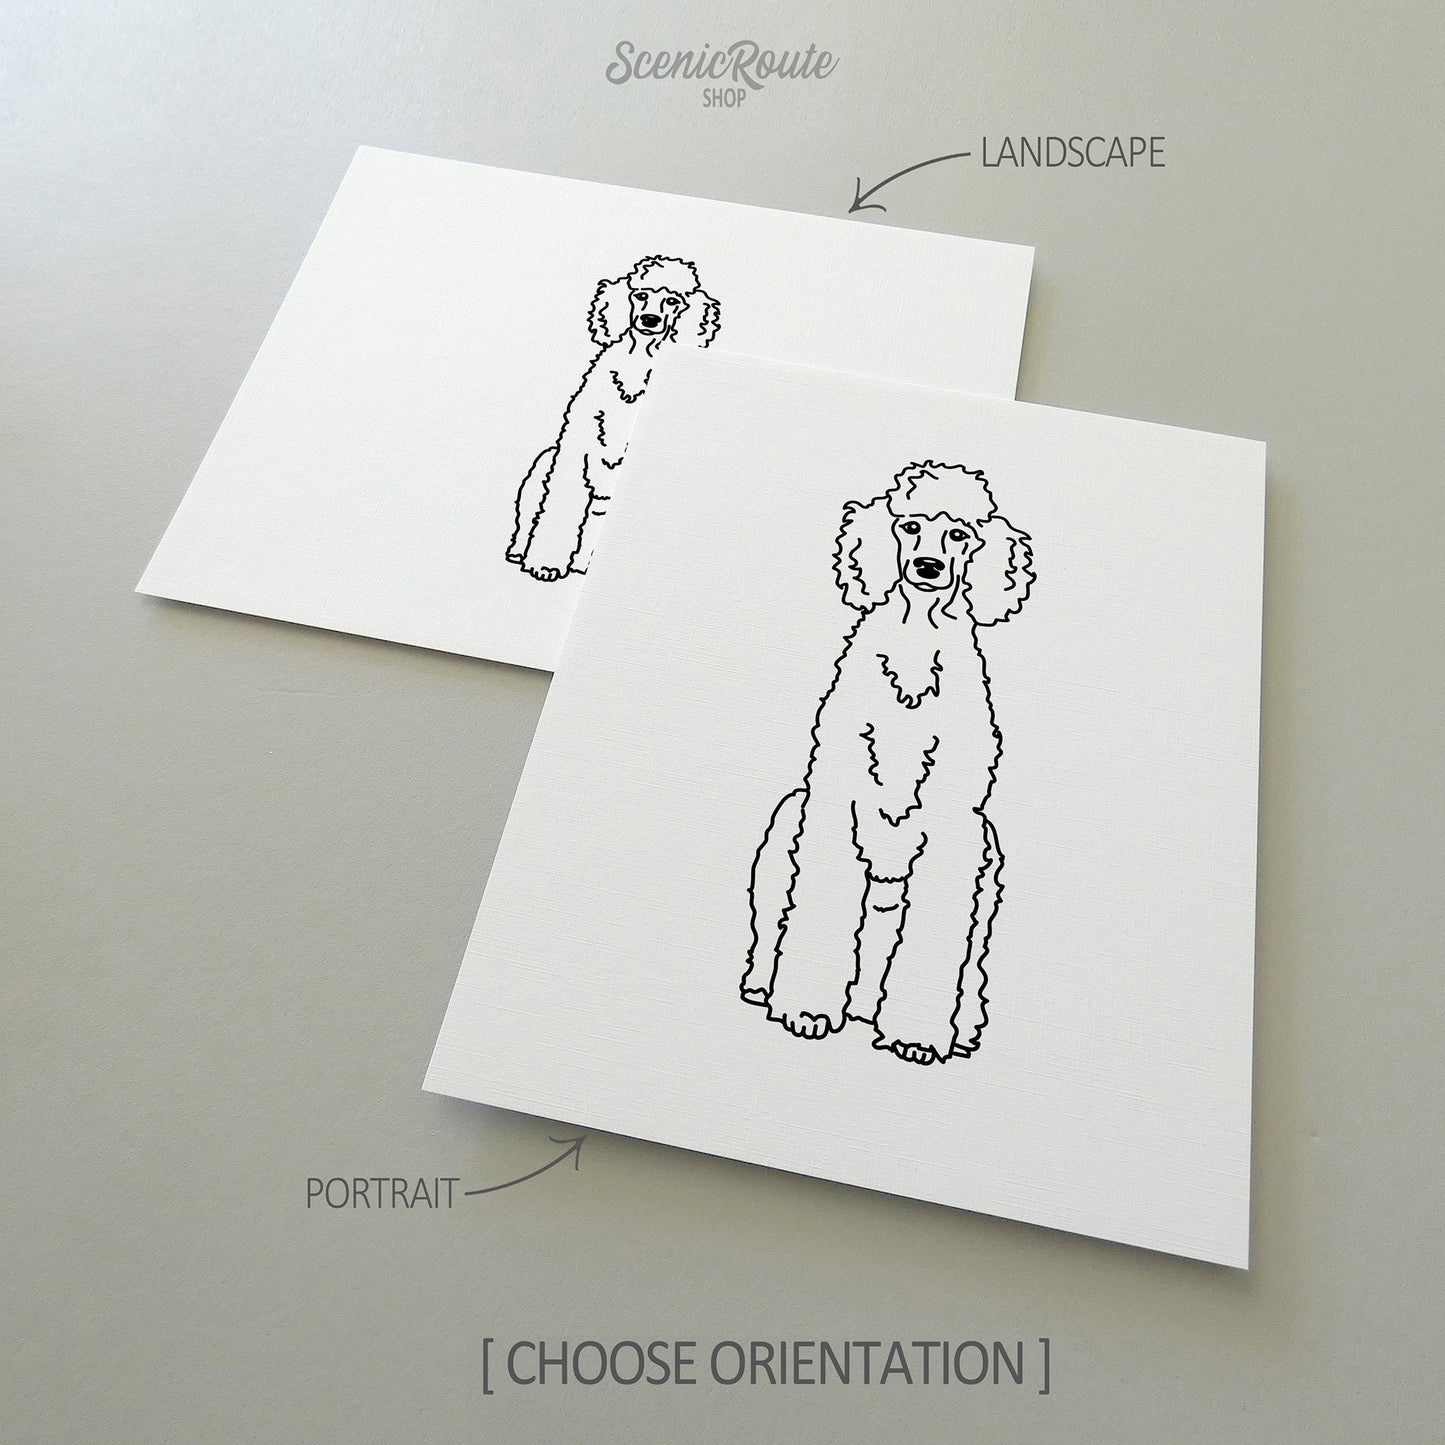 Two line art drawings of a Poodle dog on white linen paper with a gray background.  The pieces are shown in portrait and landscape orientation for the available art print options.